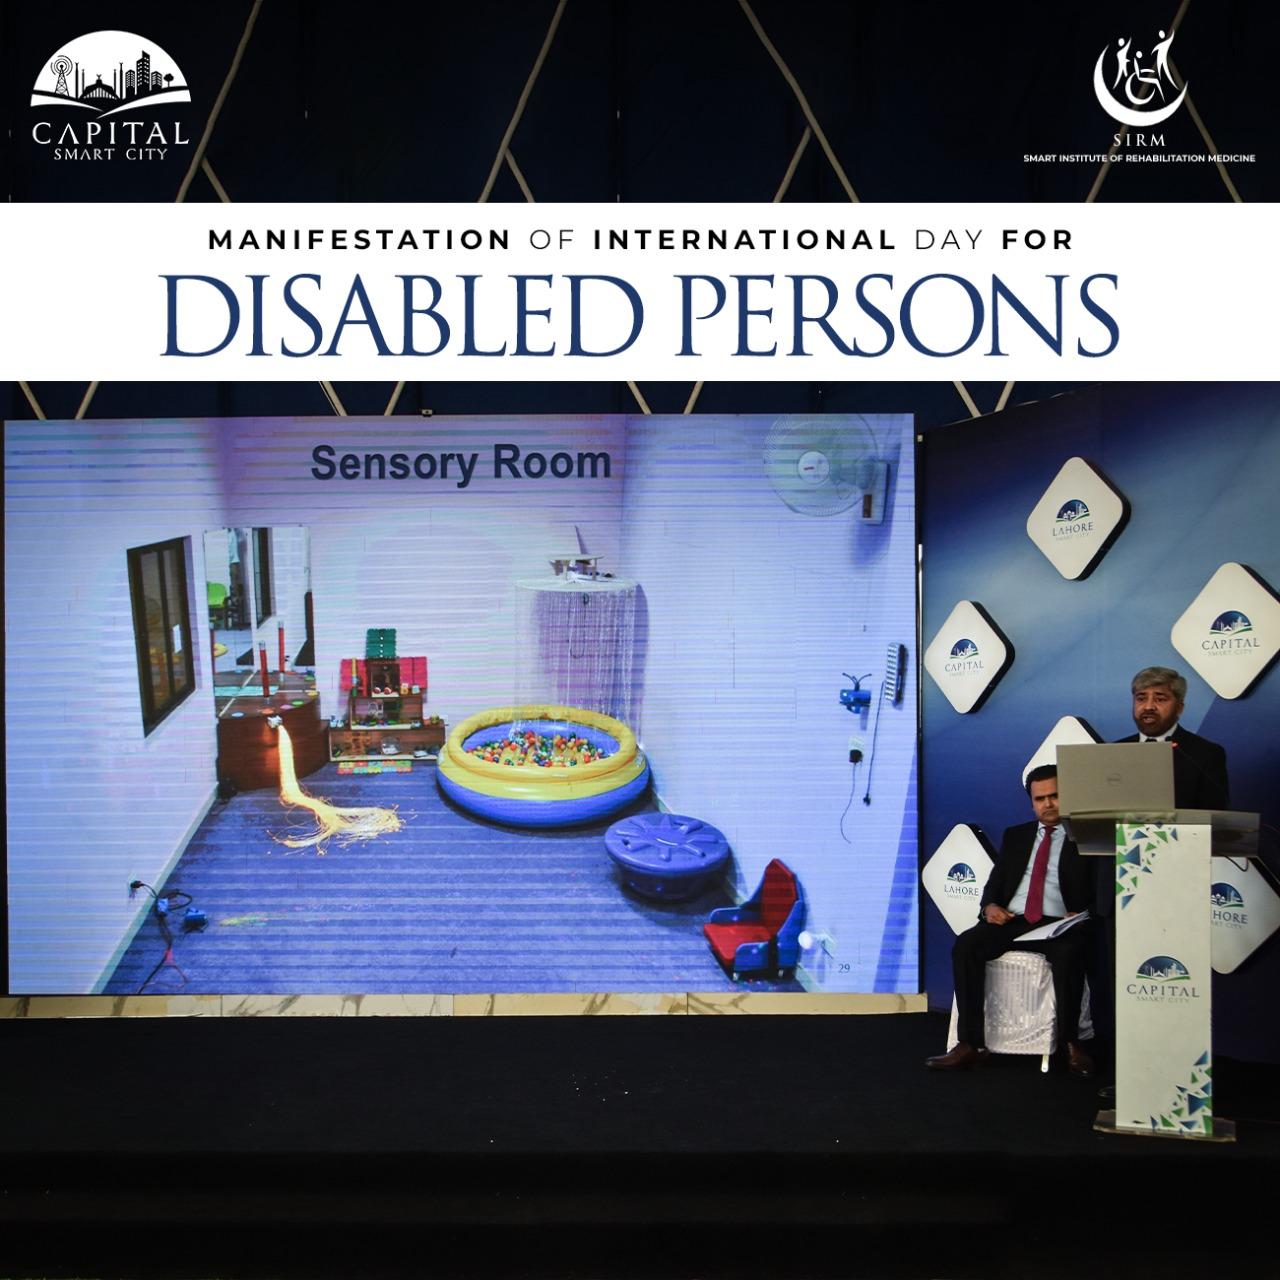 Manifestation of International Day for Disabled Persons